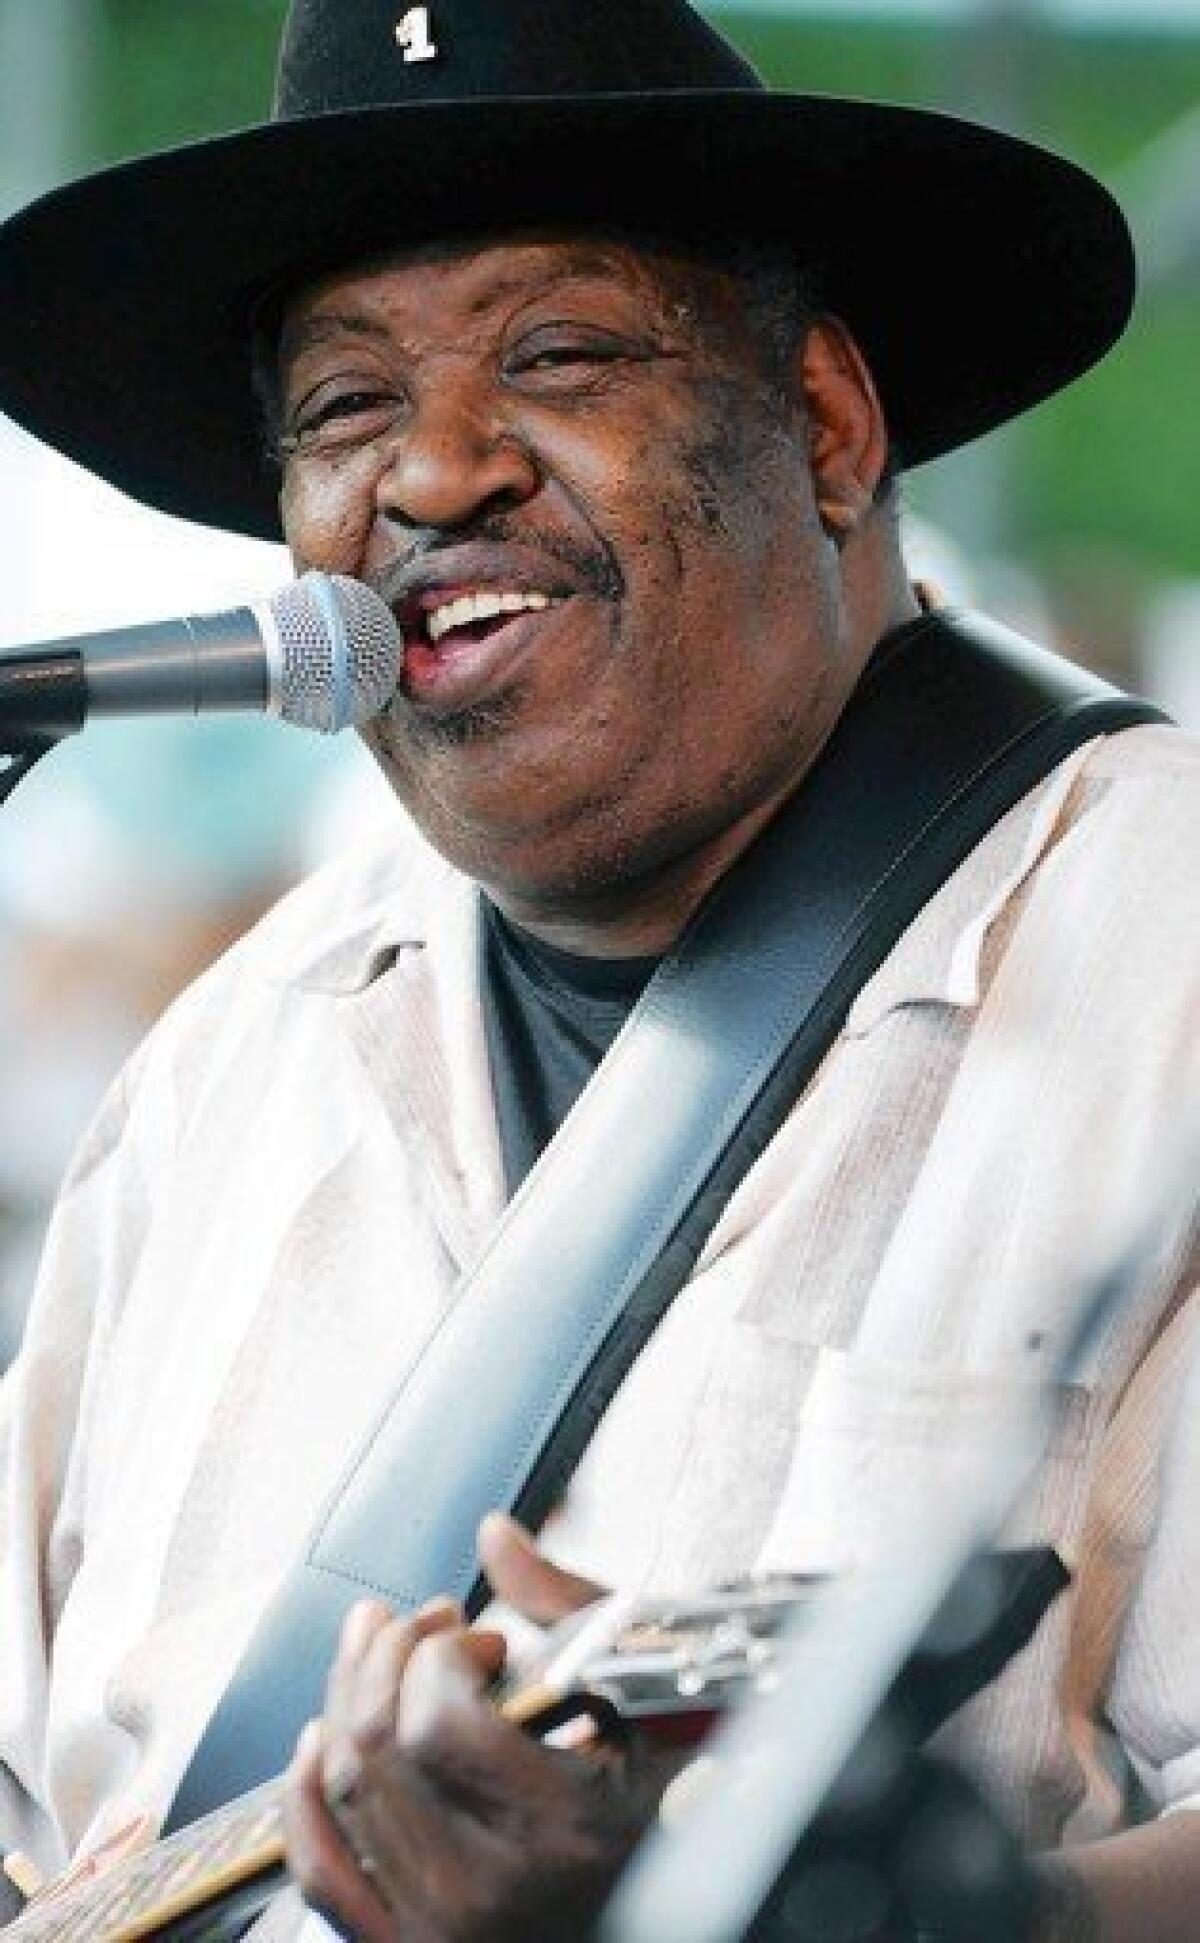 Magic Slim performs with The Teardrops in 2009.